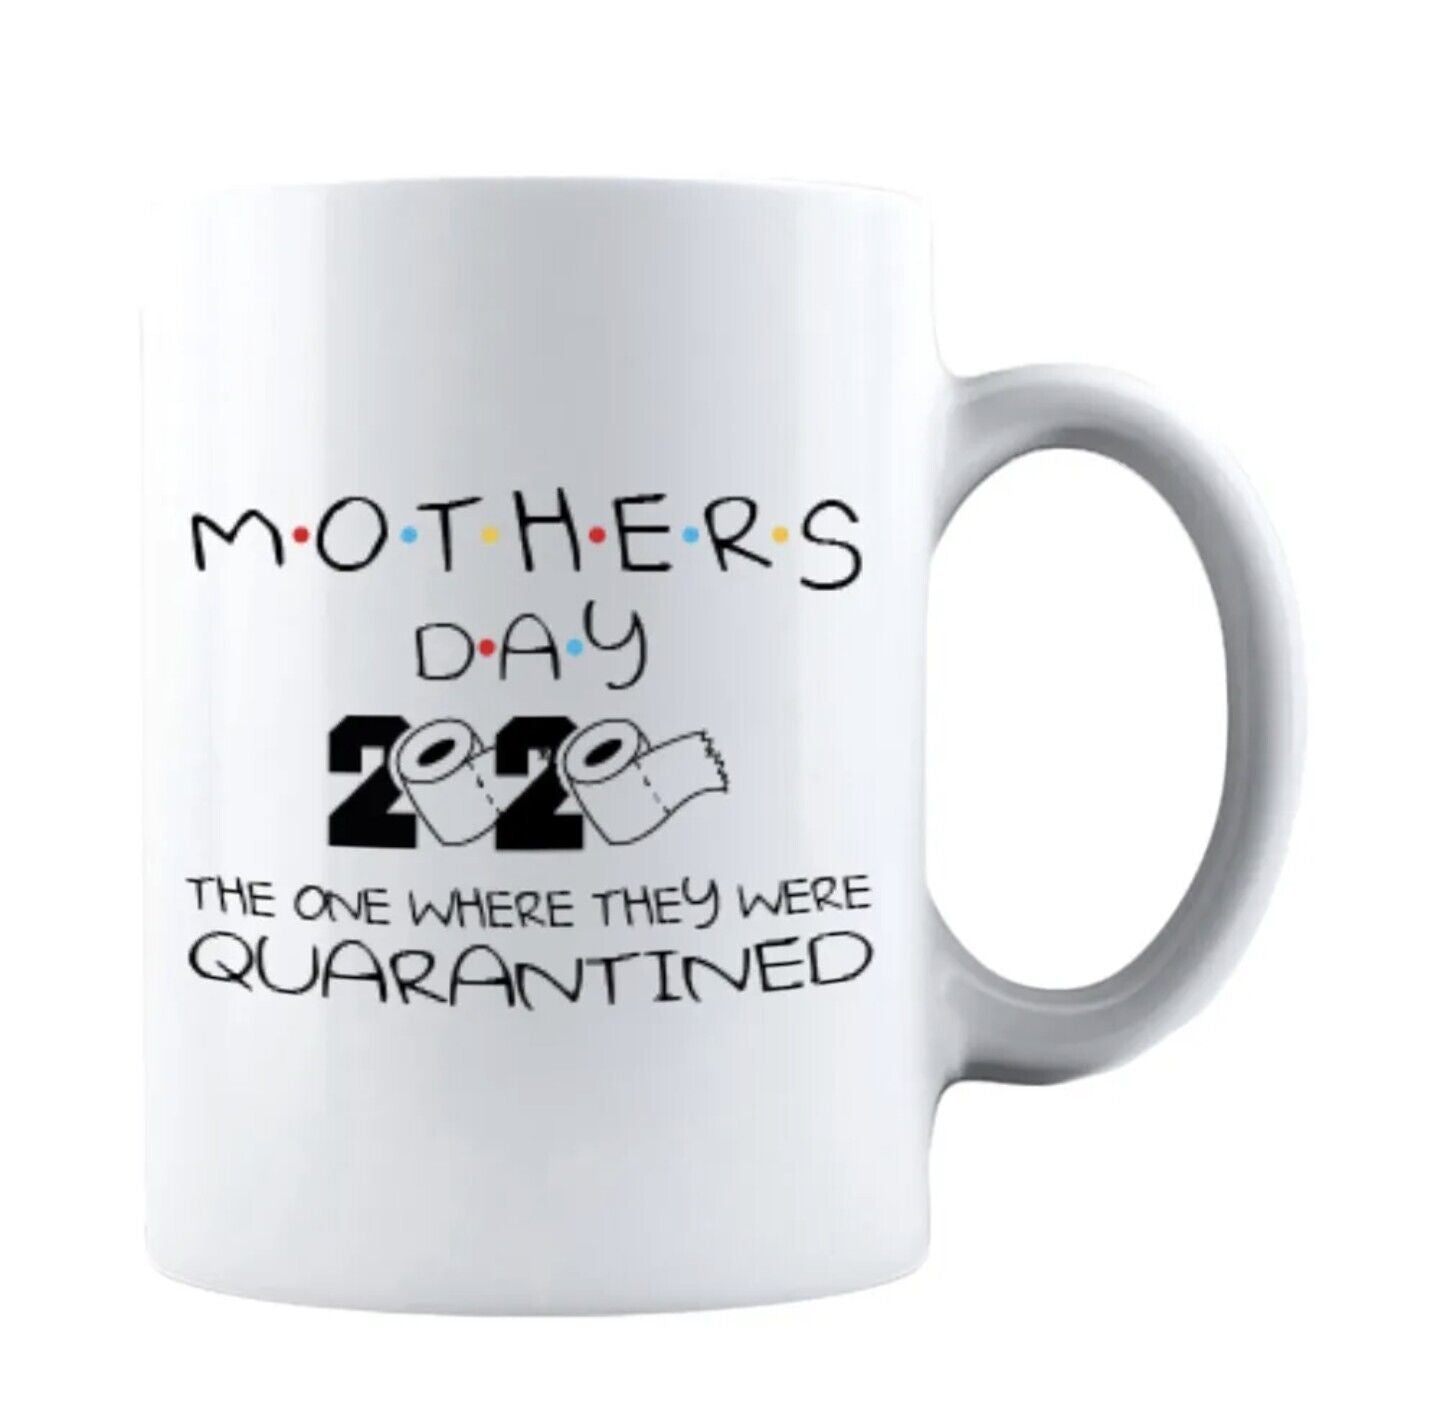 Mother's Day 2020 - Gift For Mom Coffee Cup - 11oz or 15oz Mug